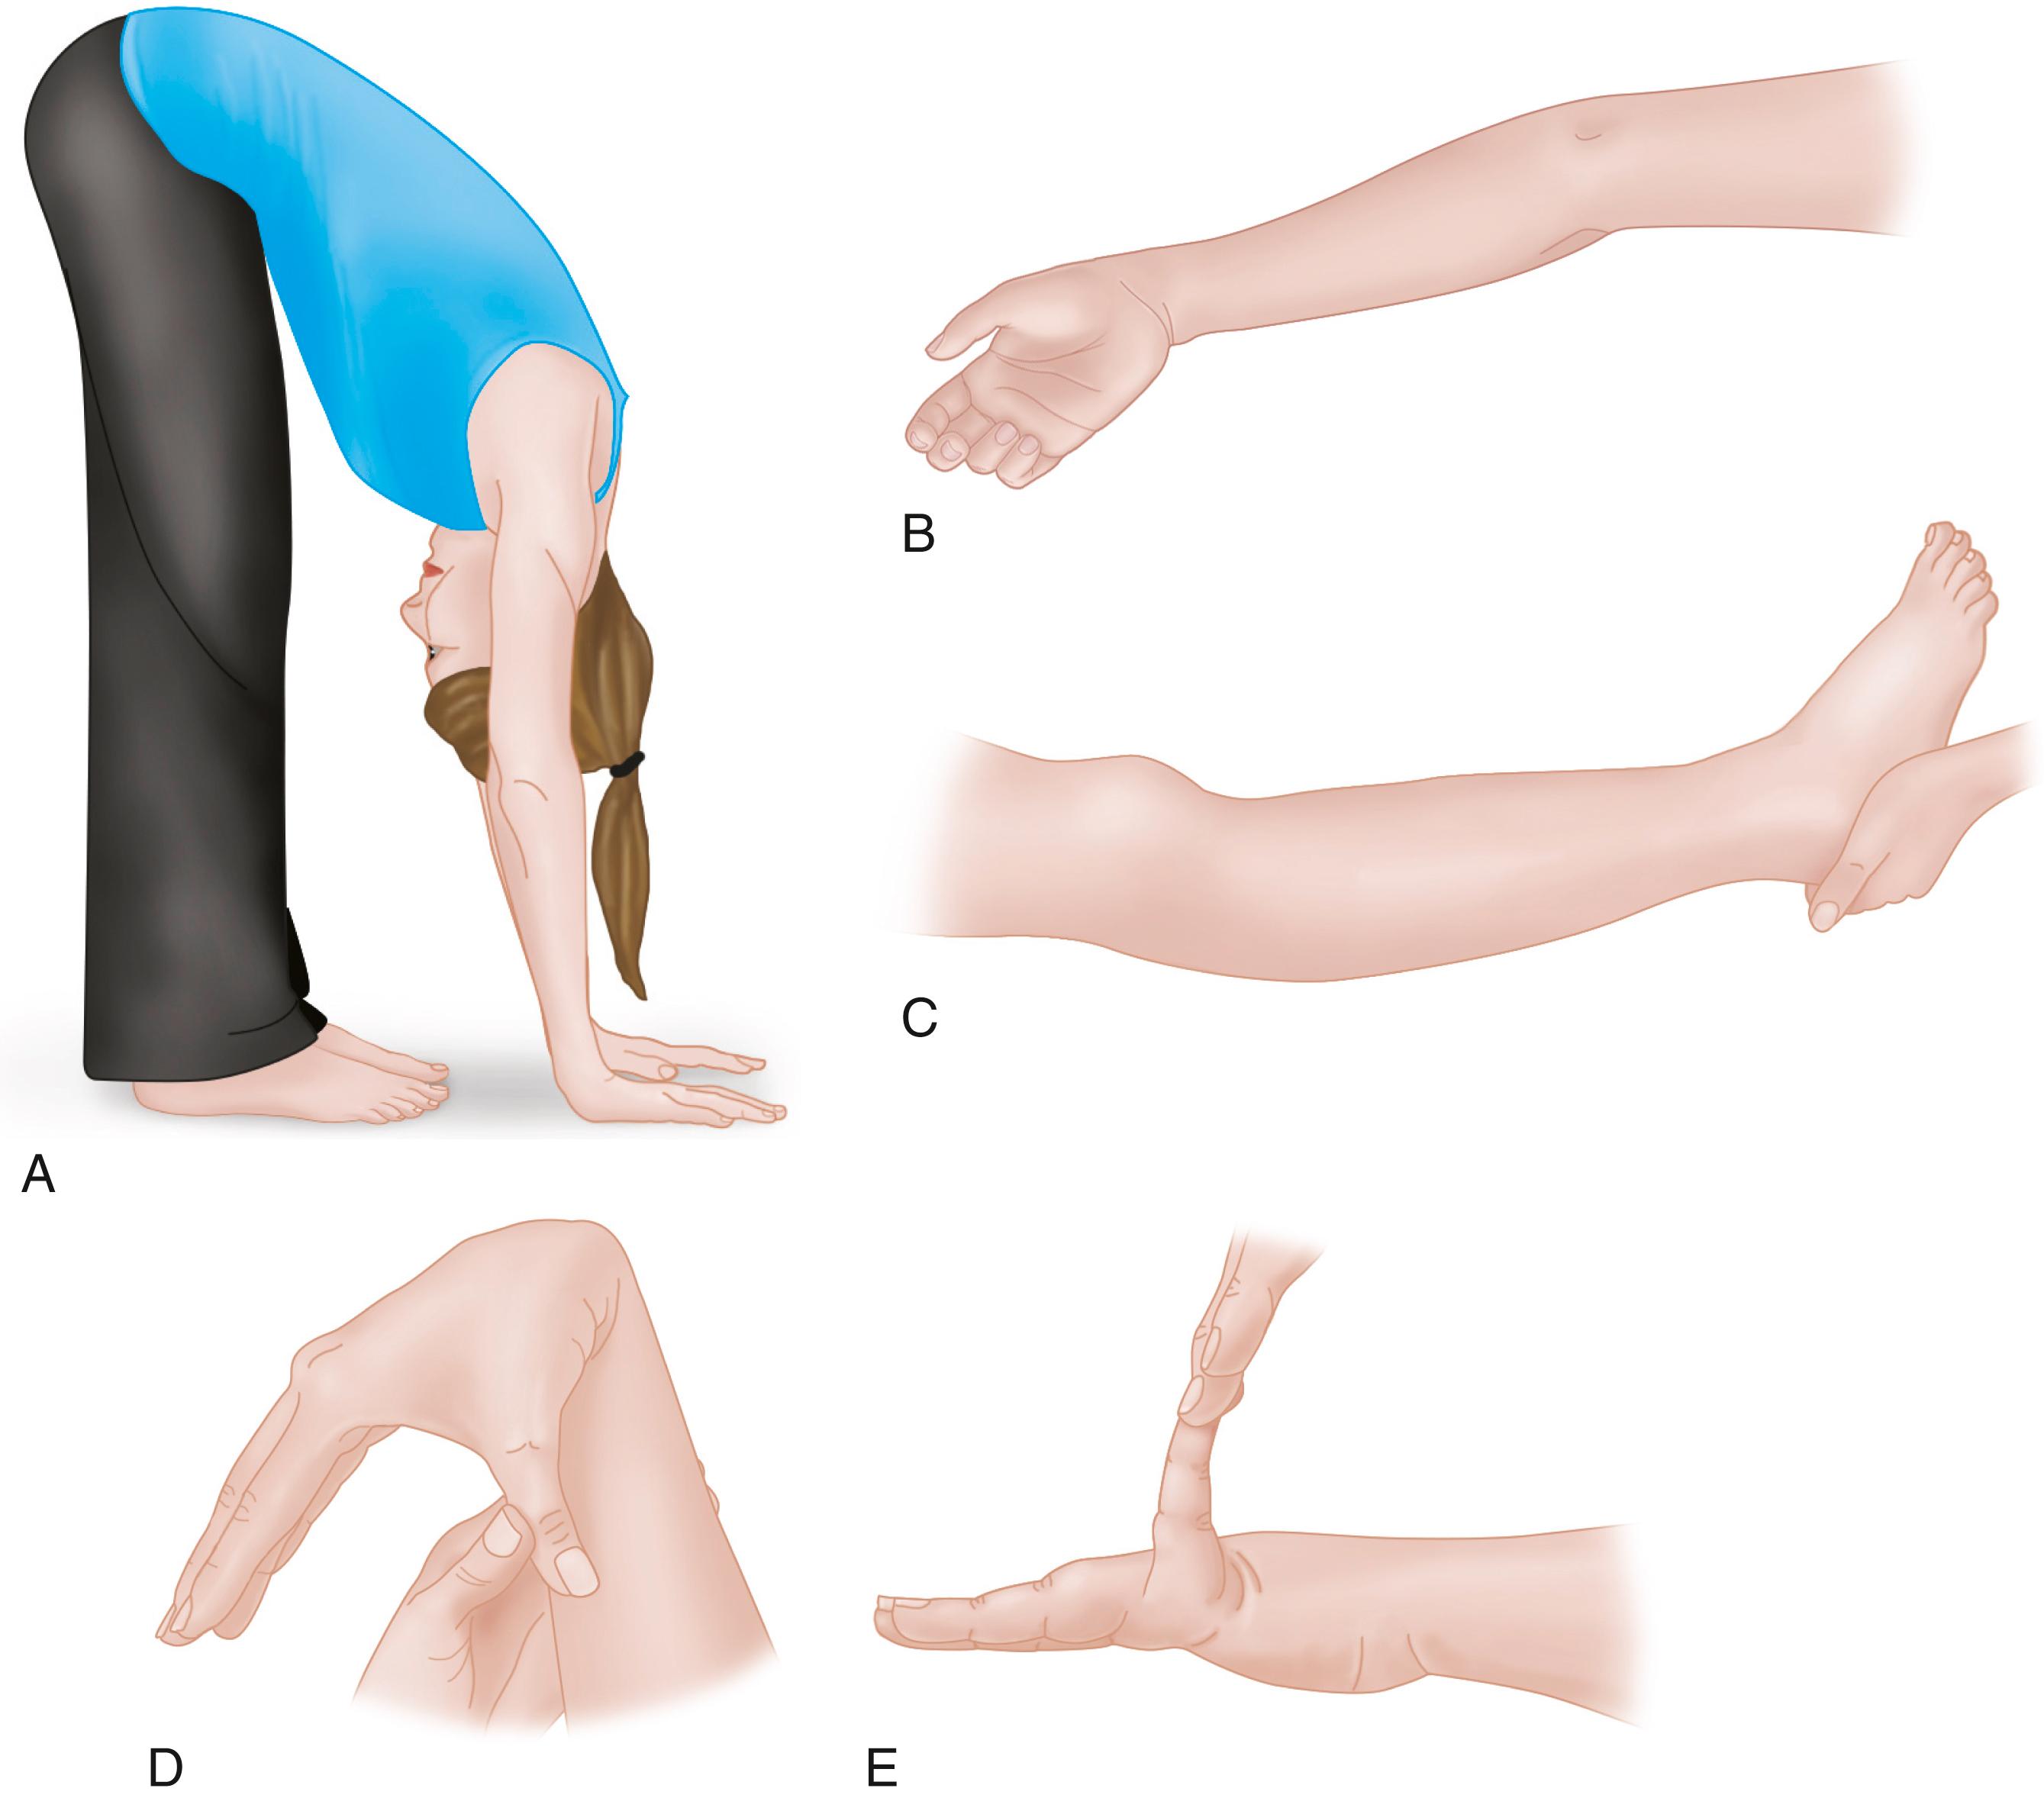 FIGURE 82.9, Beighton score. An answer of yes to two or more indicates hypermobility. A, 1 point if while forward bending and legs straight palms can be placed on ground. B, 1 point for each elbow that can bend backward. C, 1 point for each knee that can bend backward. D, 1 point for each thumb that can touch the forearm when forward bending. E, 1 point for each finger that can bend more than 90 degrees backward.